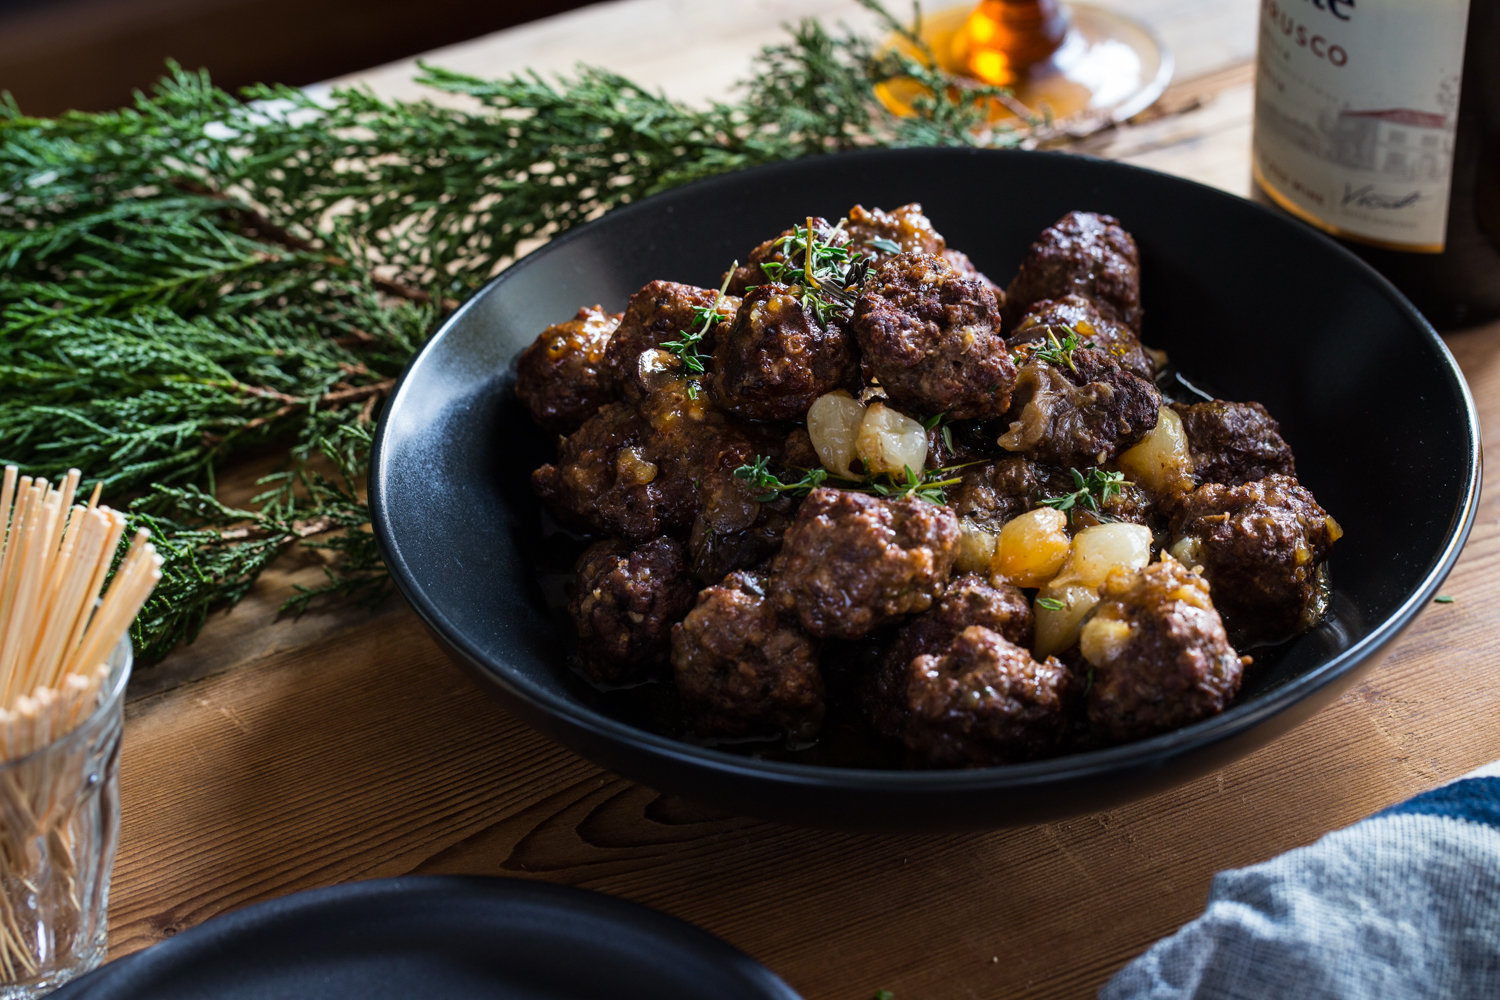 Beef Bourguignon Meatballs are started on the stovetop and finished in the slow cooker for simple serving!